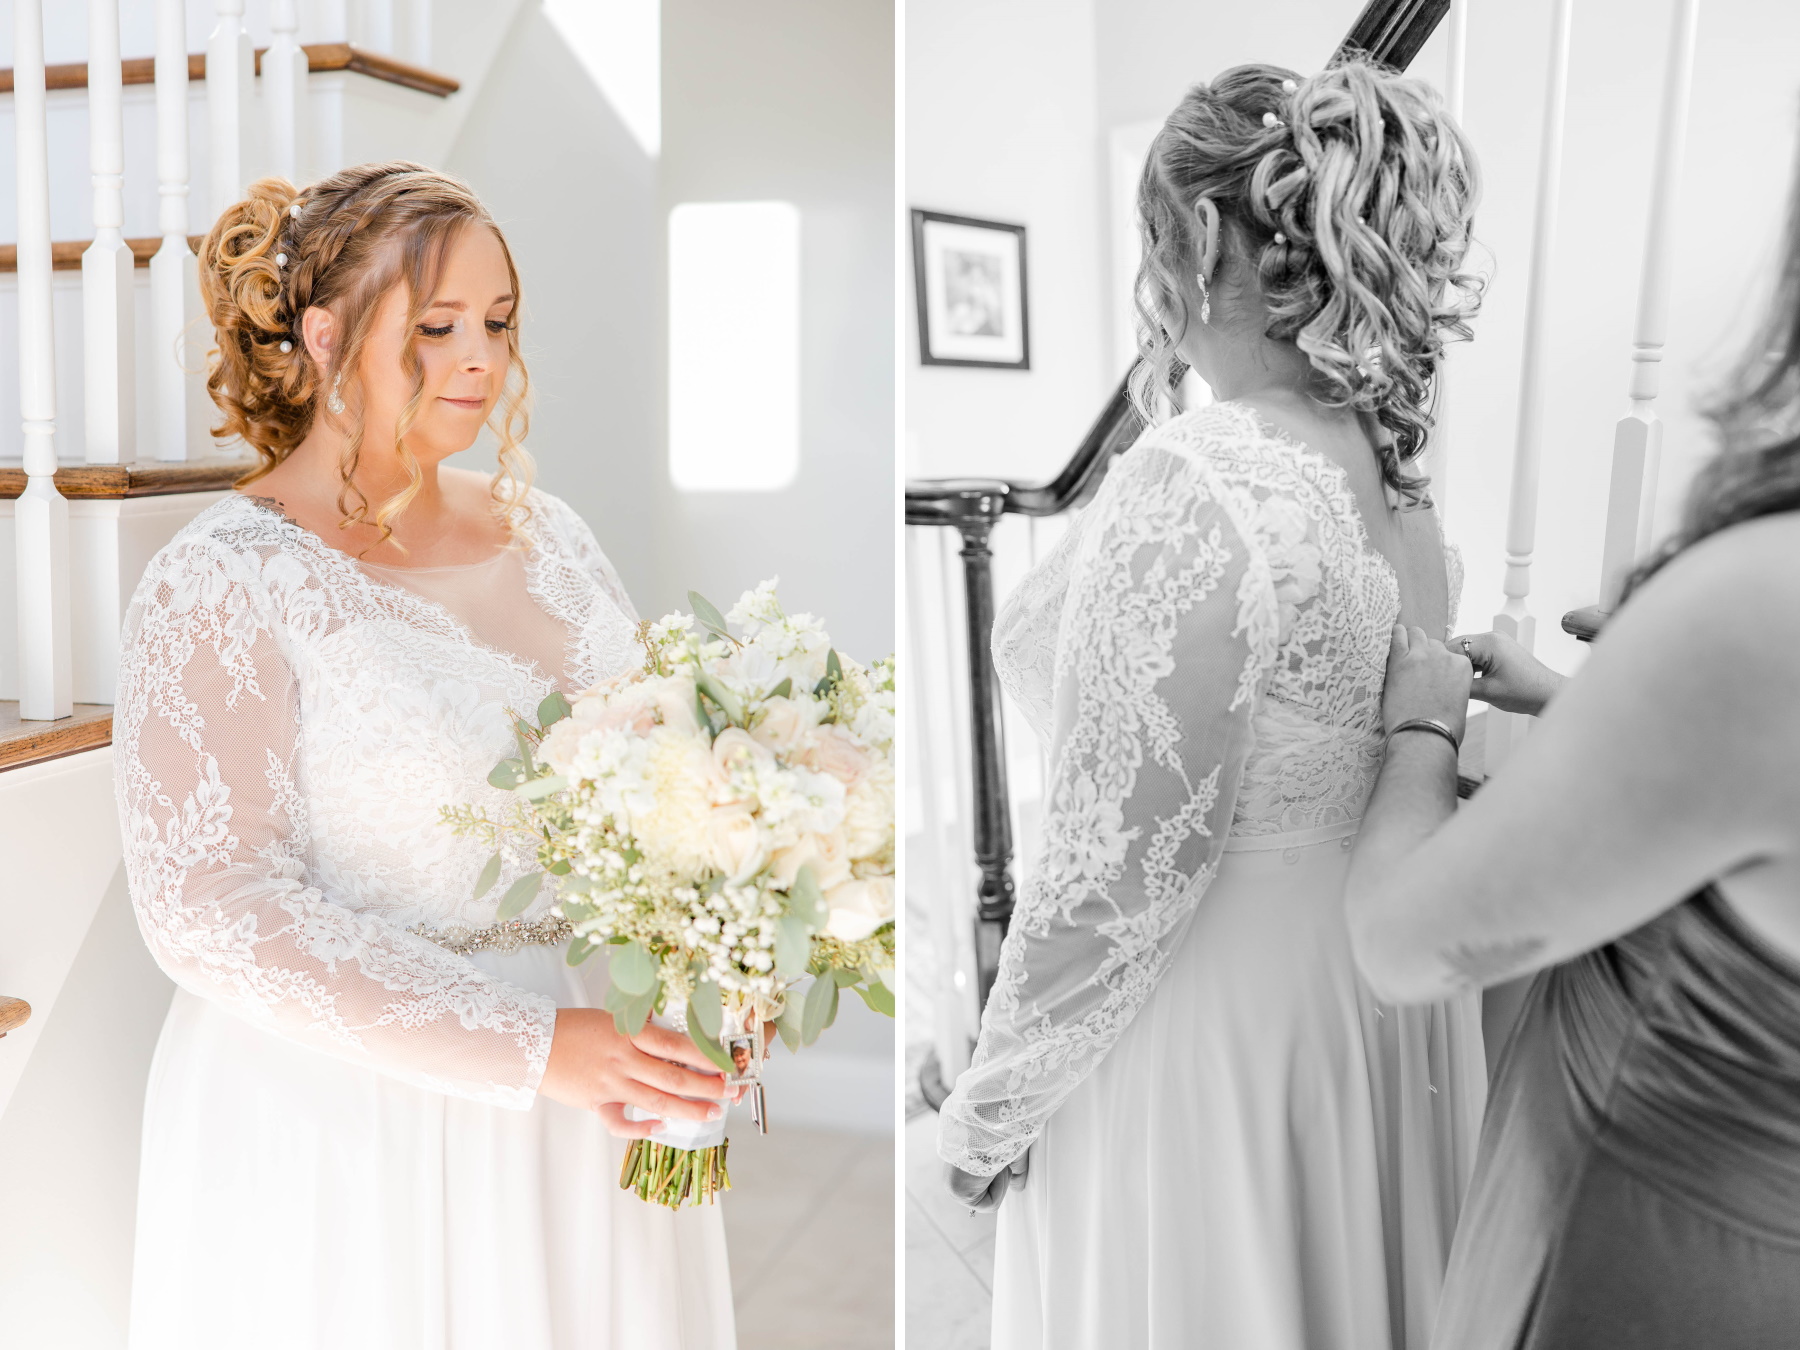 Left image shows bride looking down at bouquet. Right image shows bride getting dress buttoned up with help from her maid of honor at Great Neck Country Club Wedding